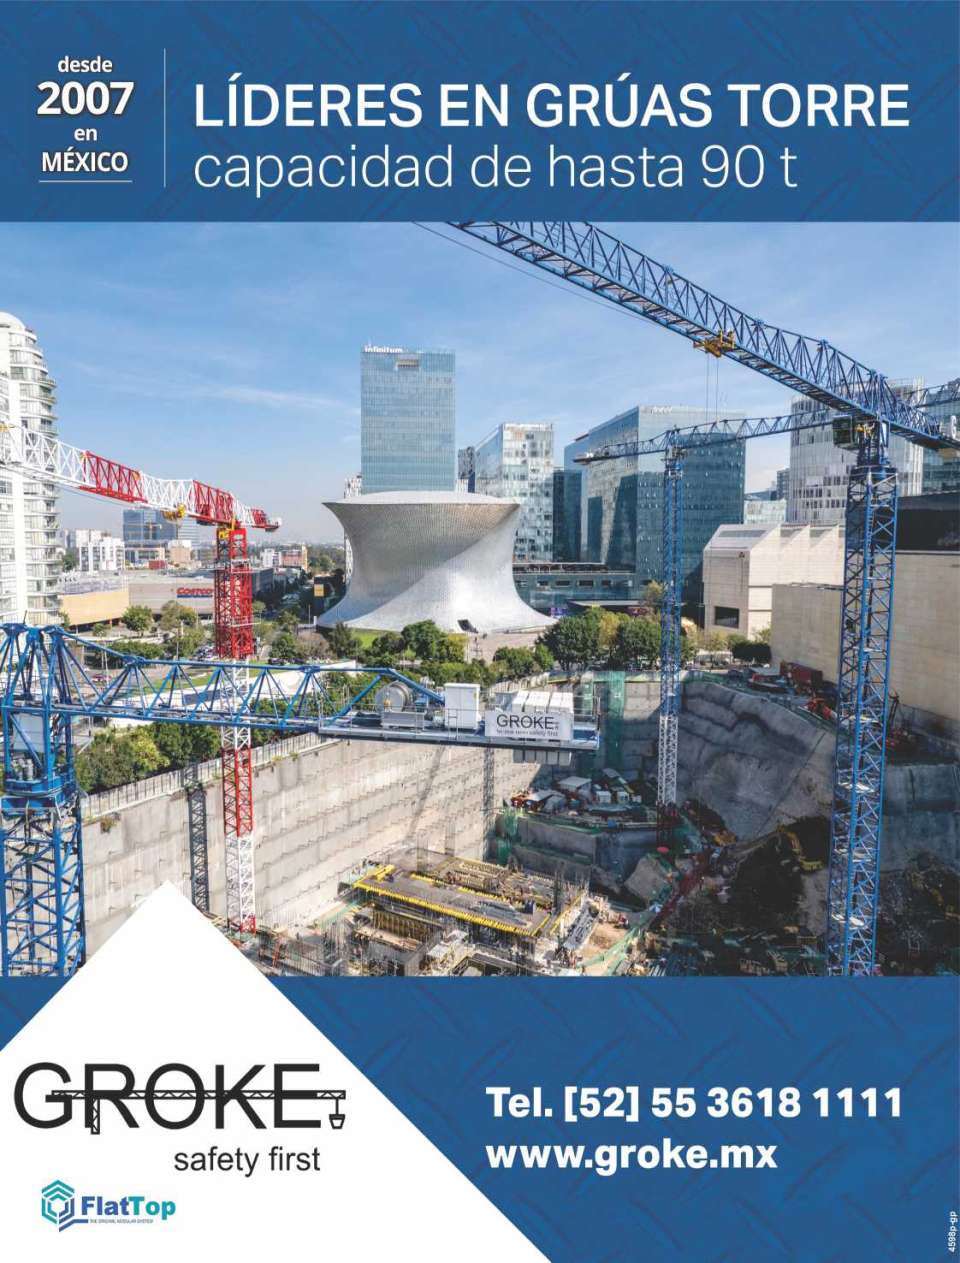 Flat Top Rent and Sale Tower Cranes with capacity of up to 90 Tons. More than 10 years in Mexico.